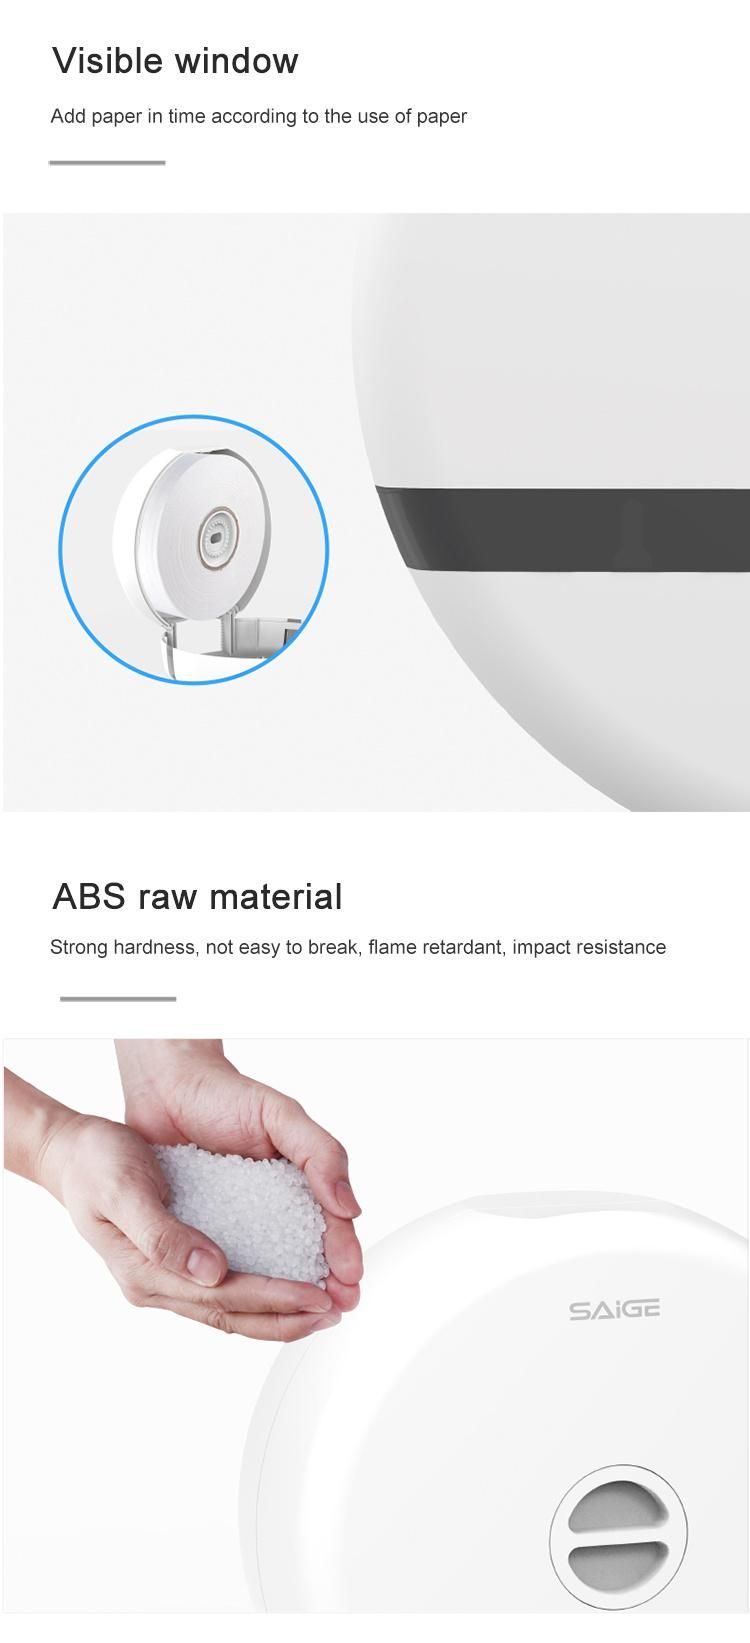 Saige High Quality Wall Mounted ABS Plastic Jumbo Roll Tissue Dispenser